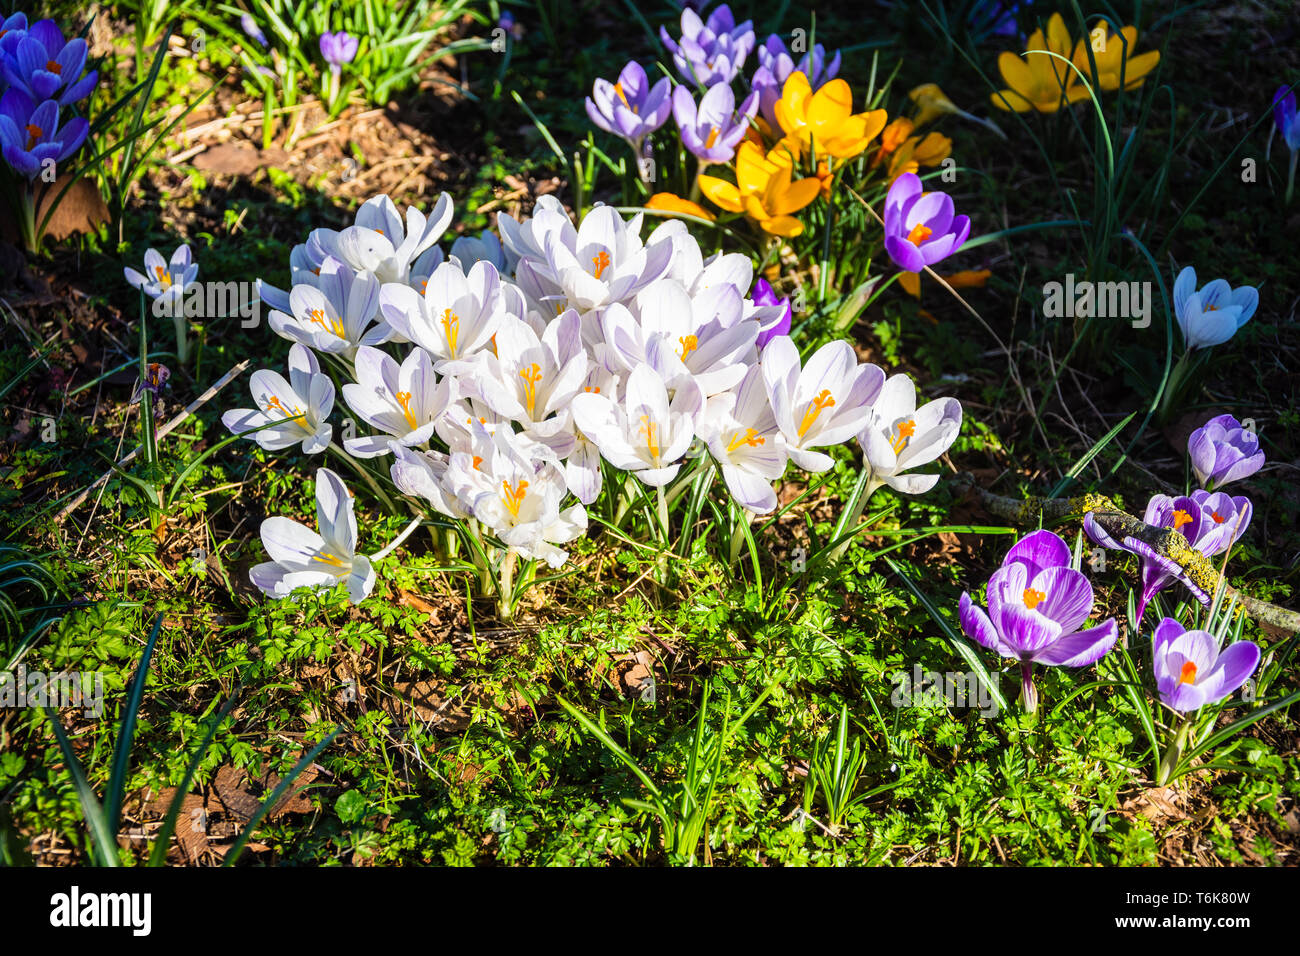 Mixed crocuses blooming in spring with a main group of white flowers and various other colours surrounding them Stock Photo